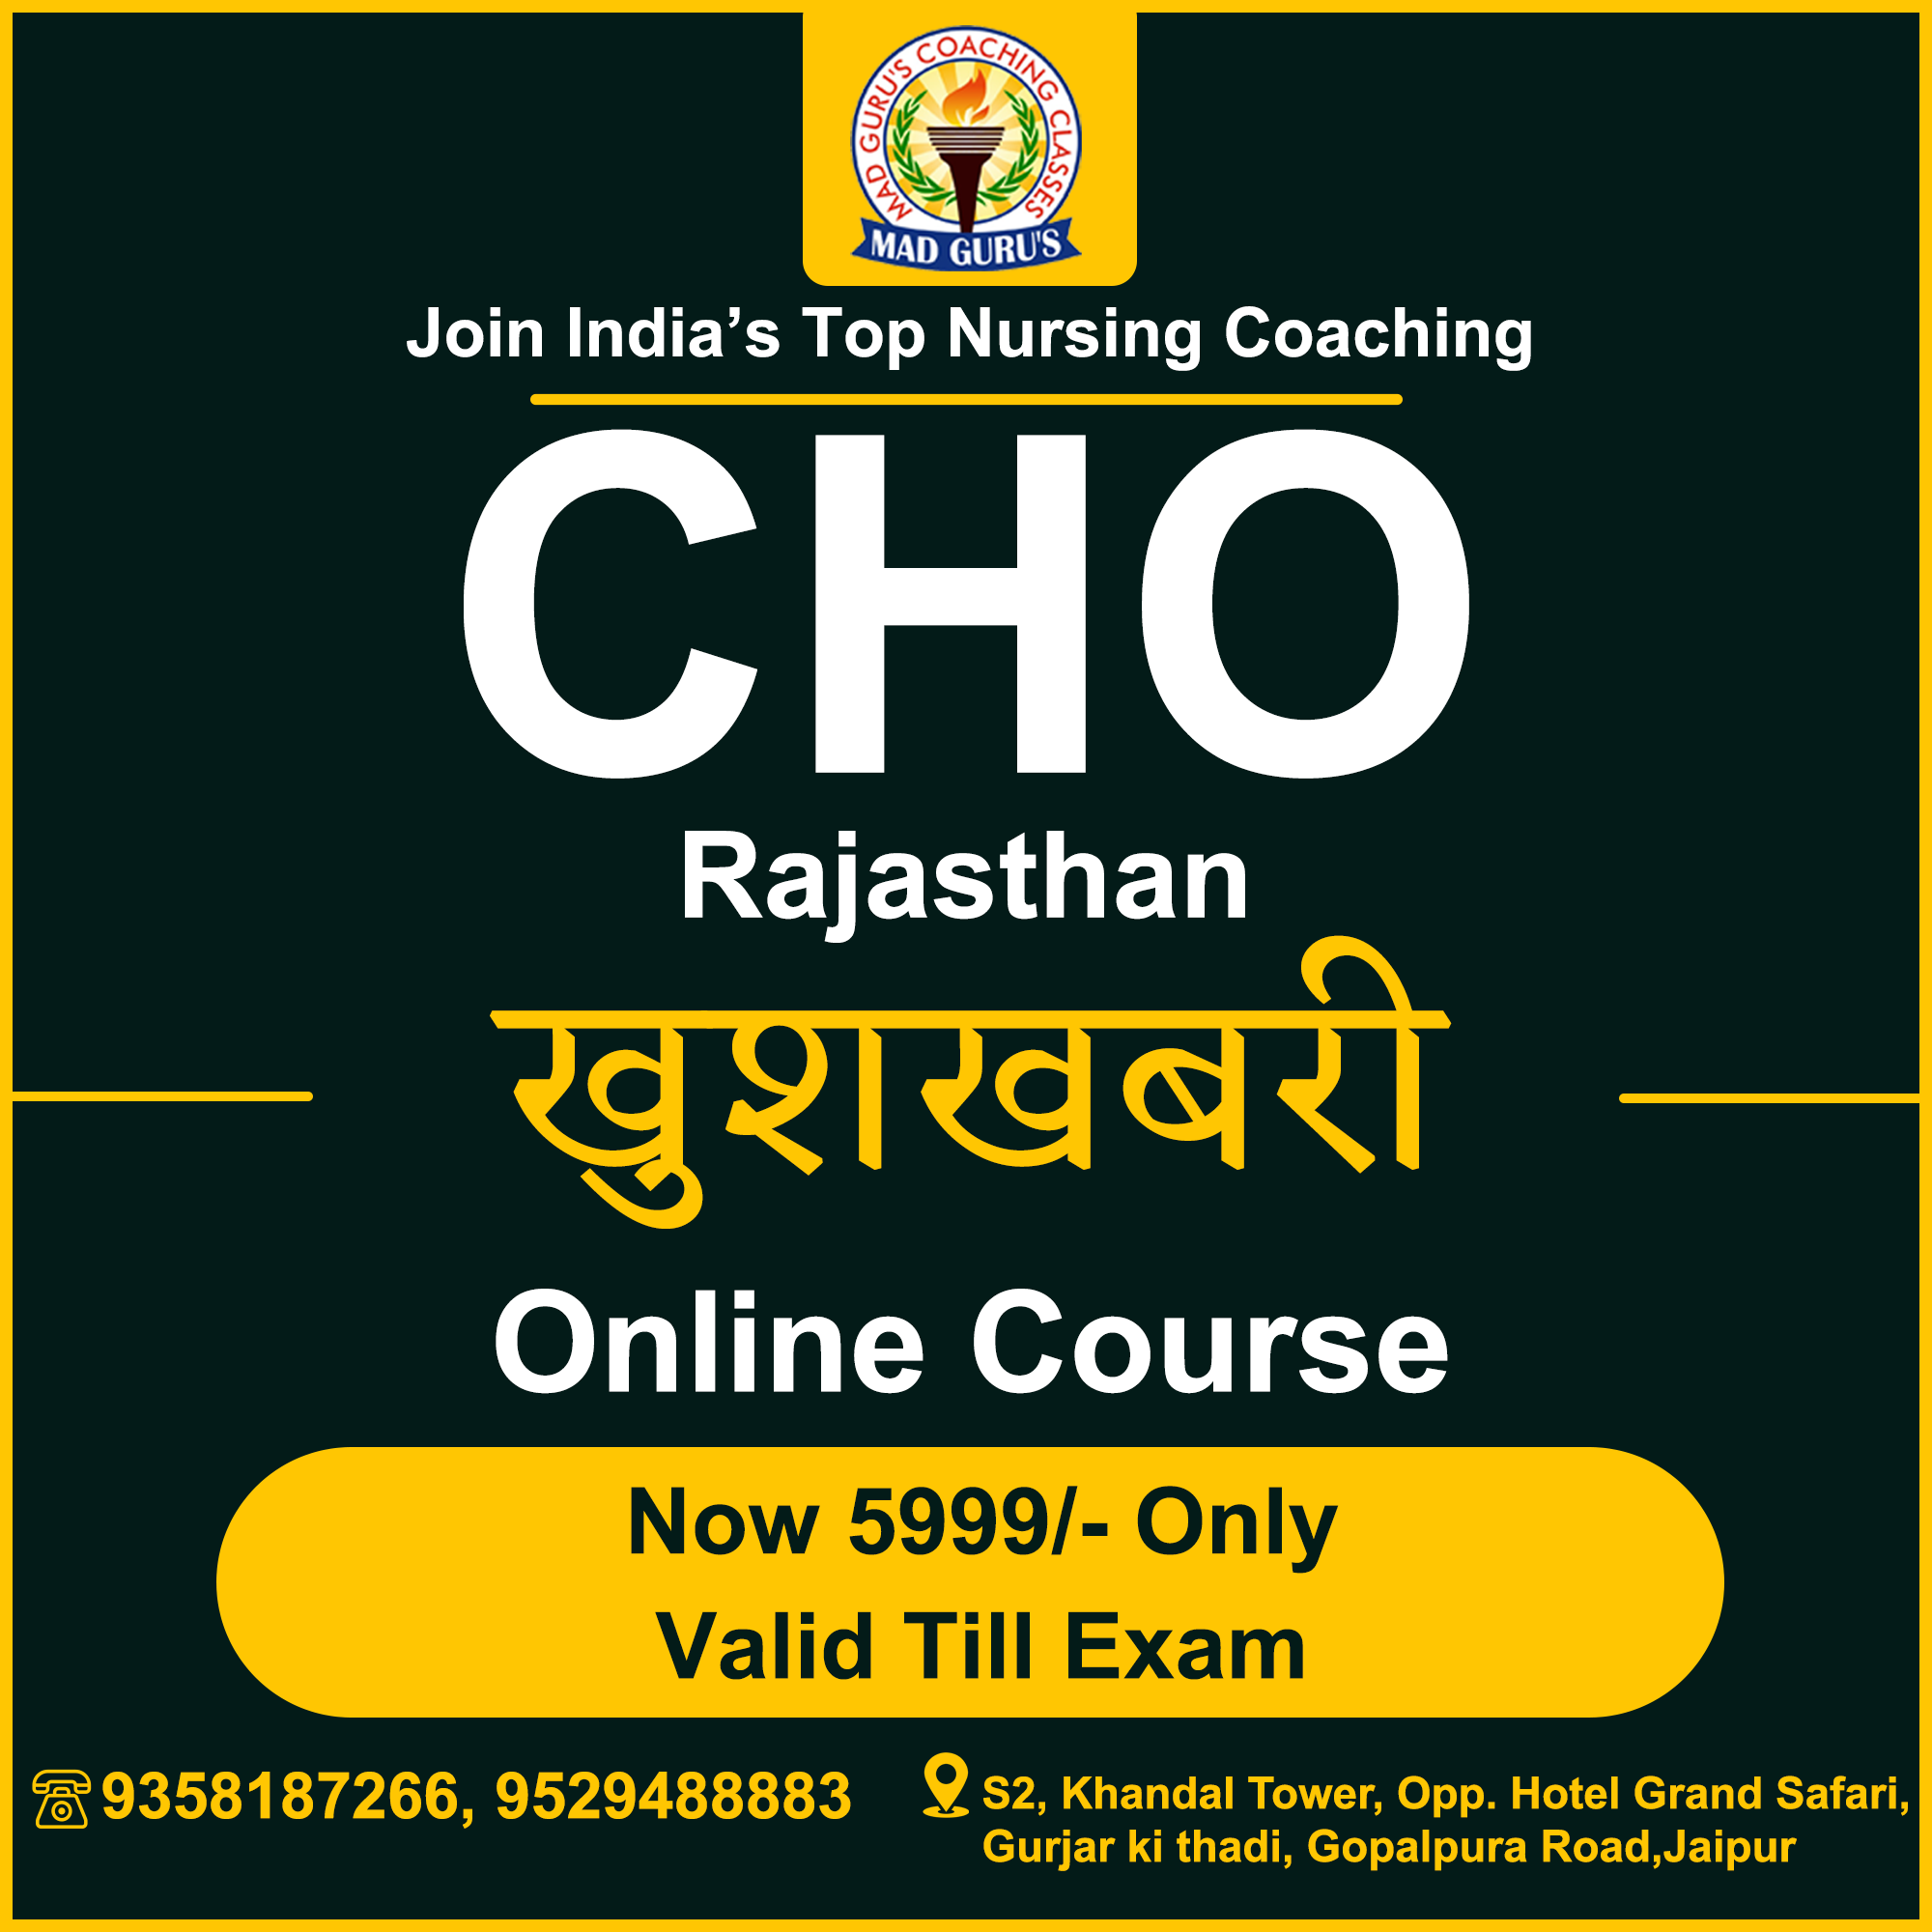 CHO Online Classroon Course (Recorded)